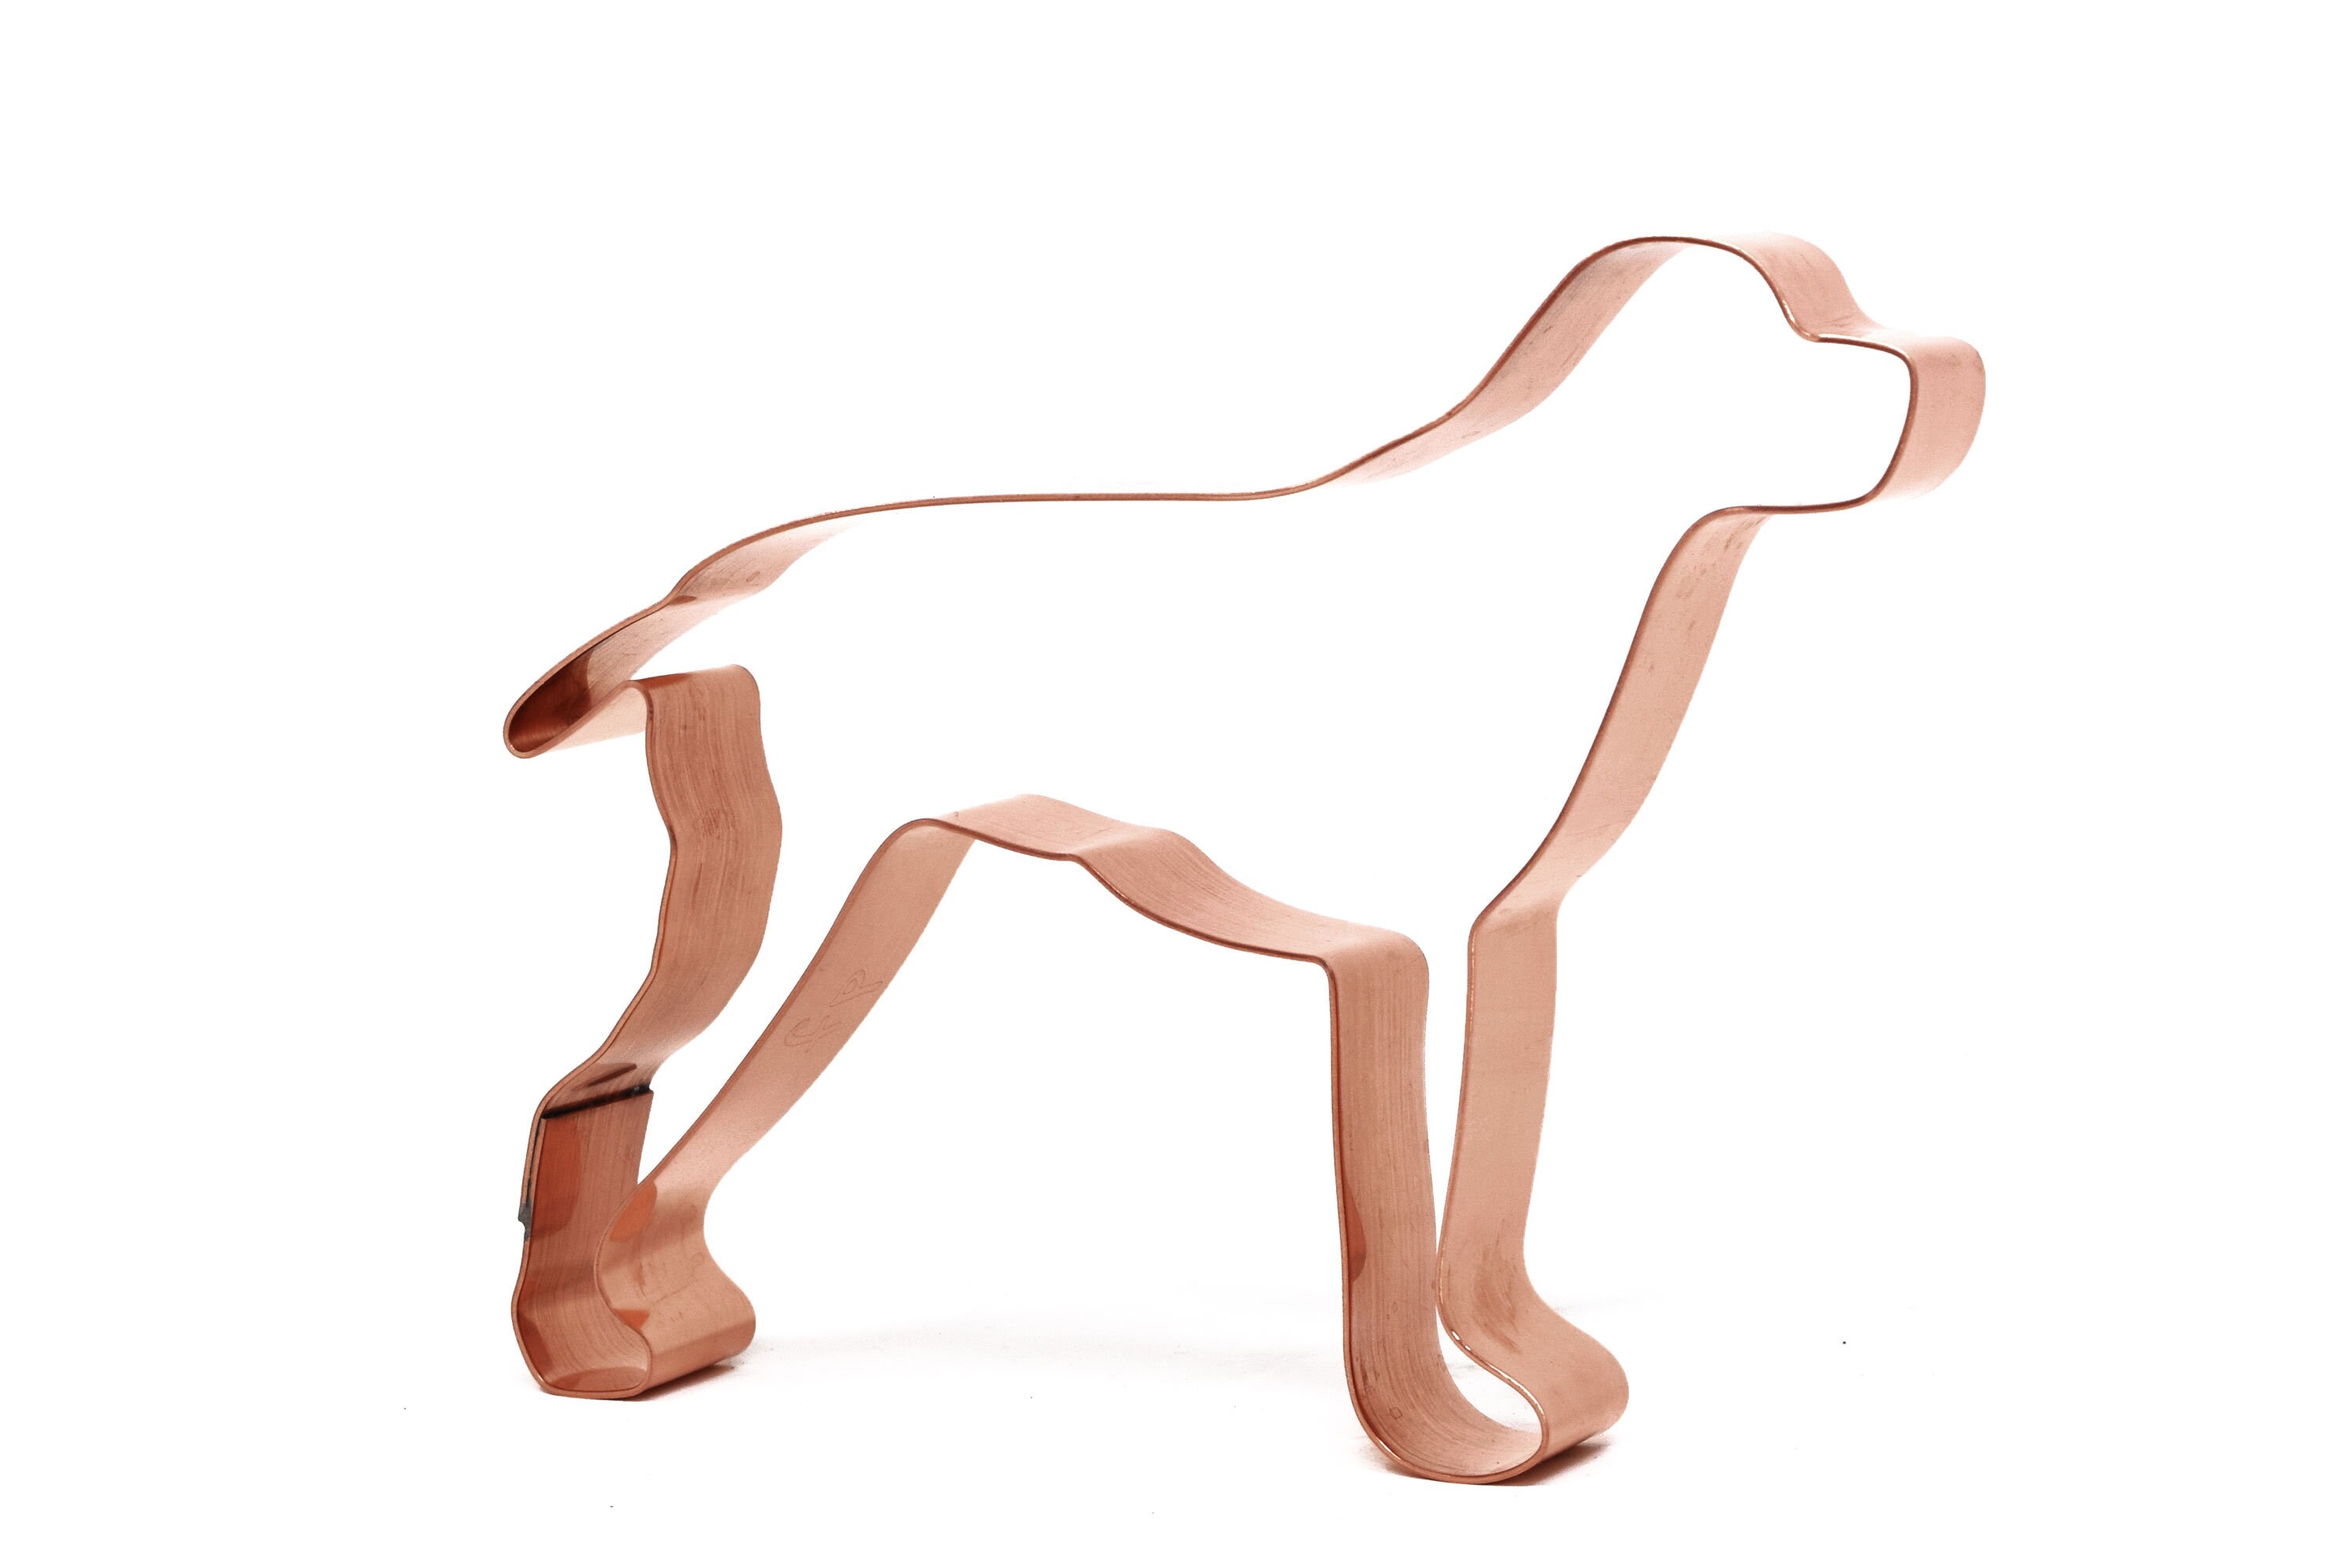 No. 1 Francais Pyrenean Dog Breed Cookie Cutter 4.25 X 3.75 inches Handcrafted by The Fussy Pup